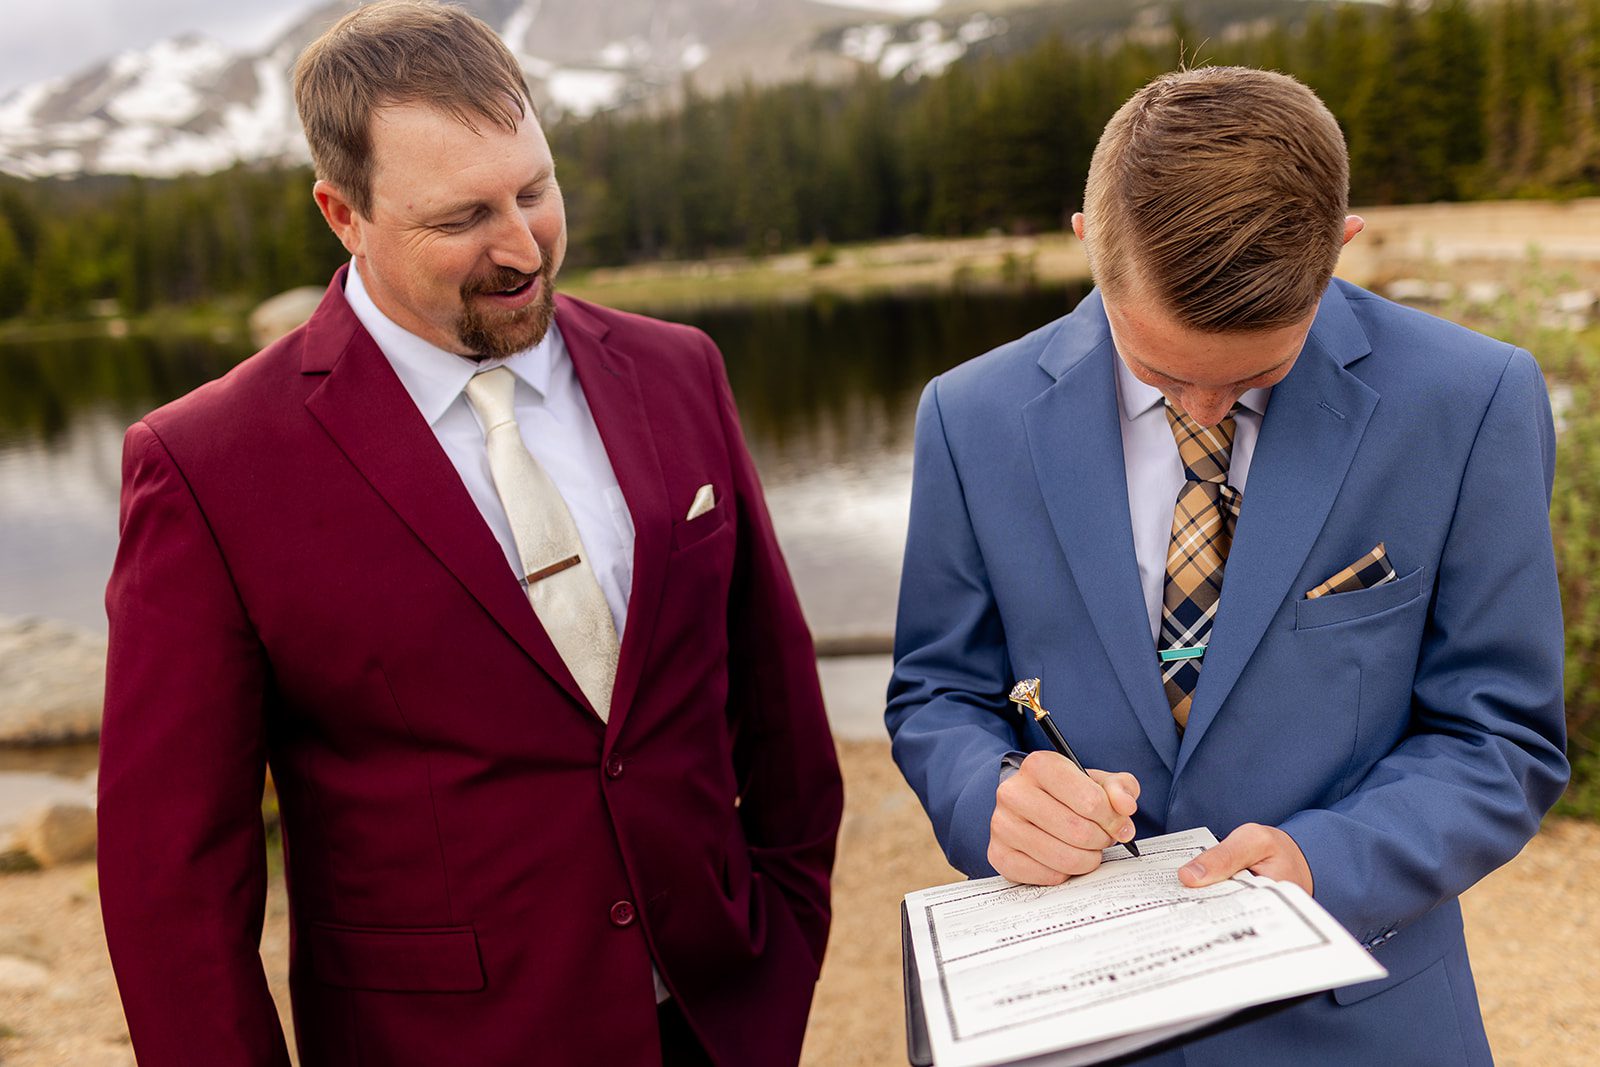 Groom and his son, son signs the marriage license.